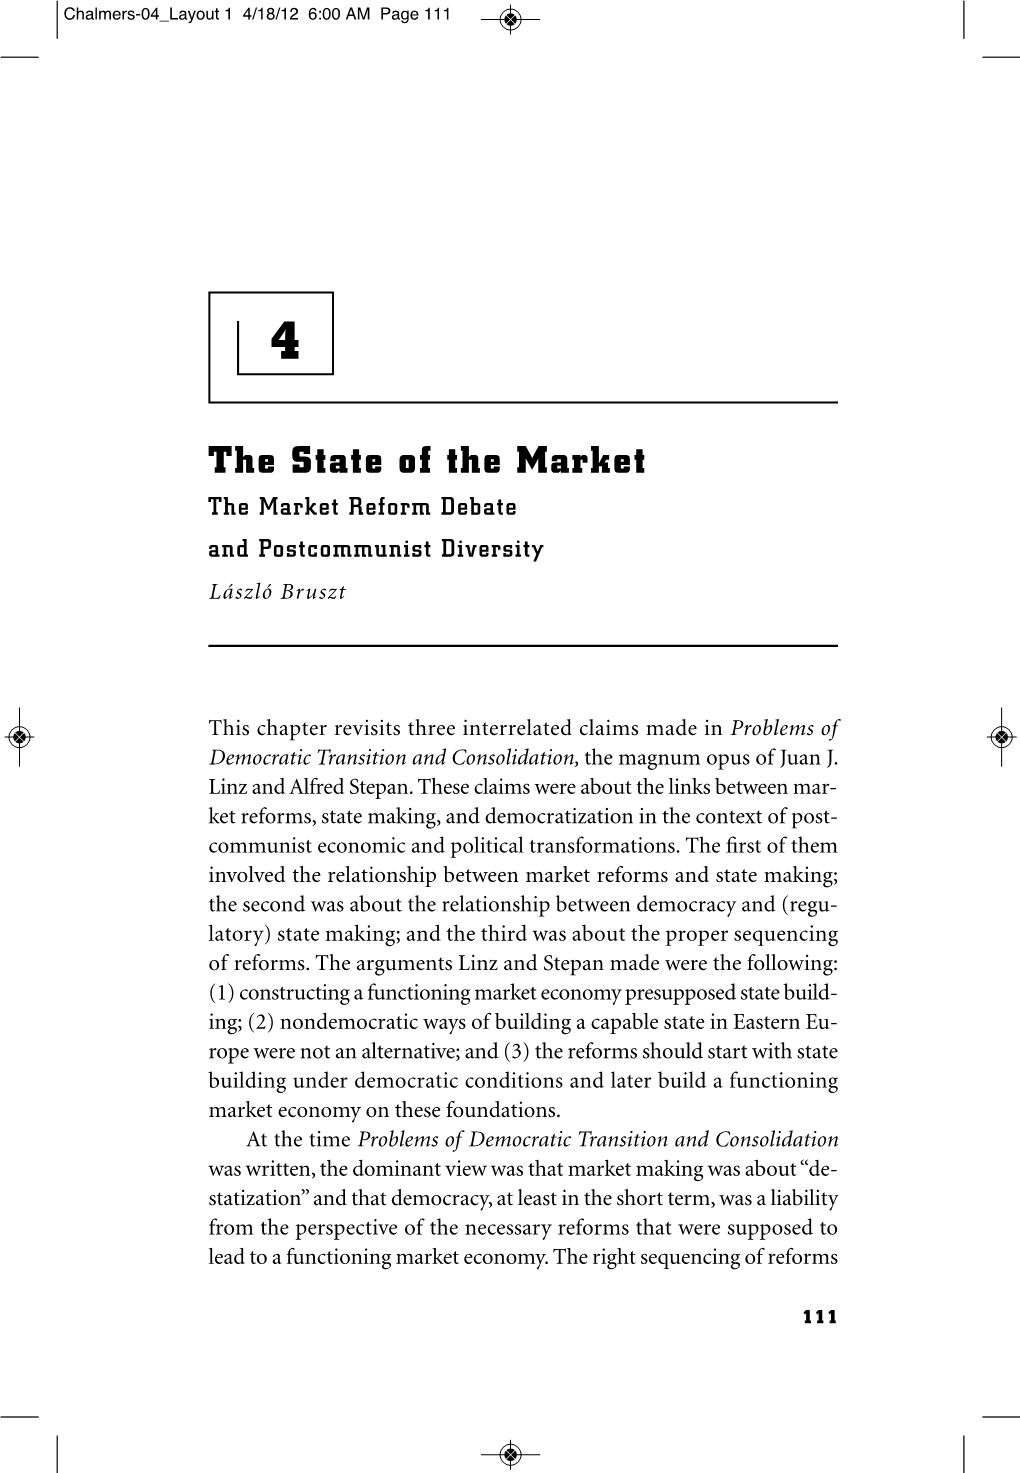 The State of the Market: the Market Reform Debate